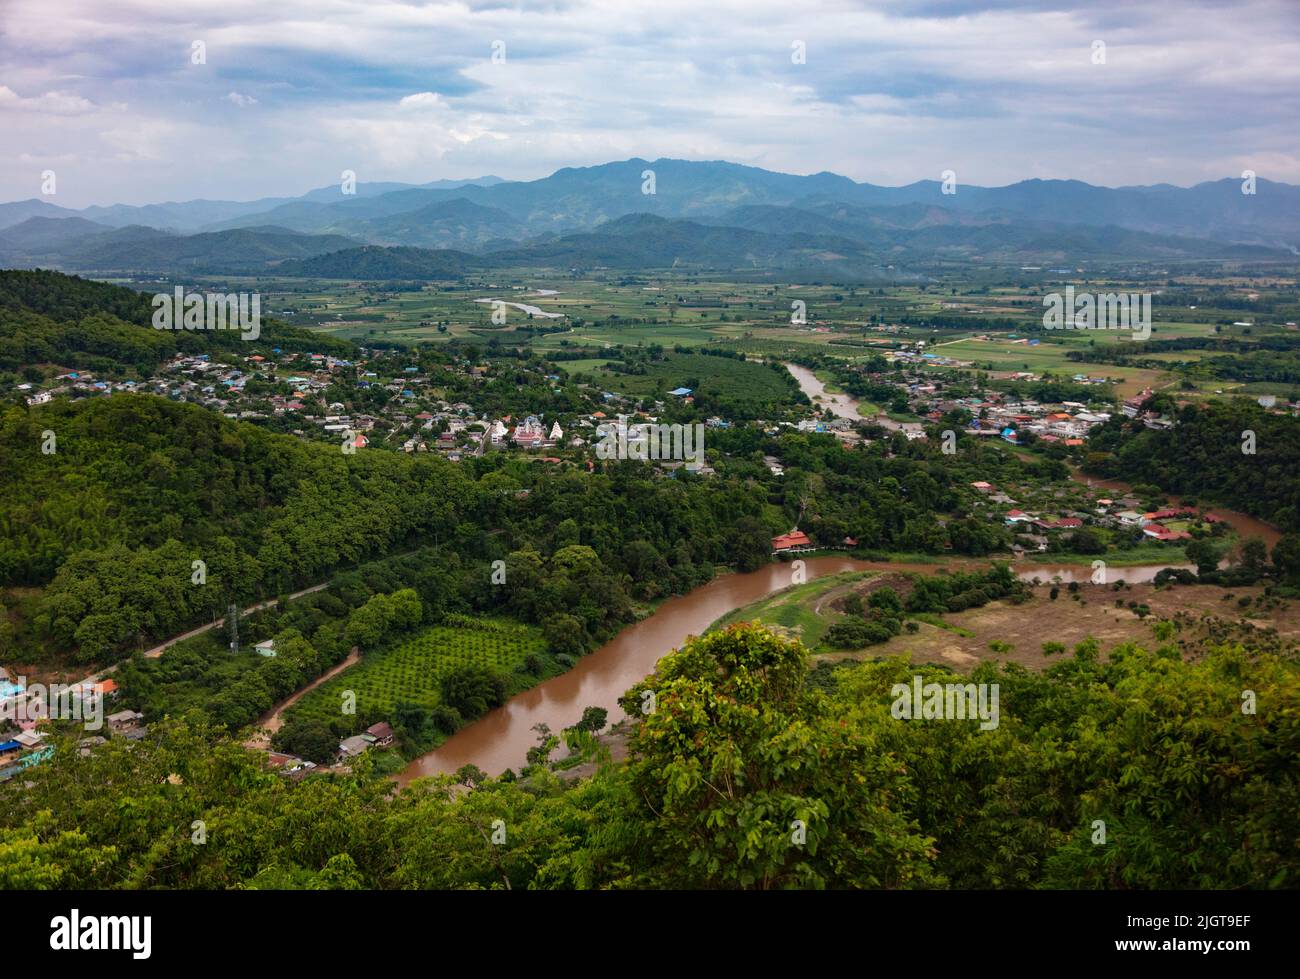 View of the Mae Kok river and the town of THATON from the BUDDHIST STUPA at WAT THATON - THAILAND Stock Photo